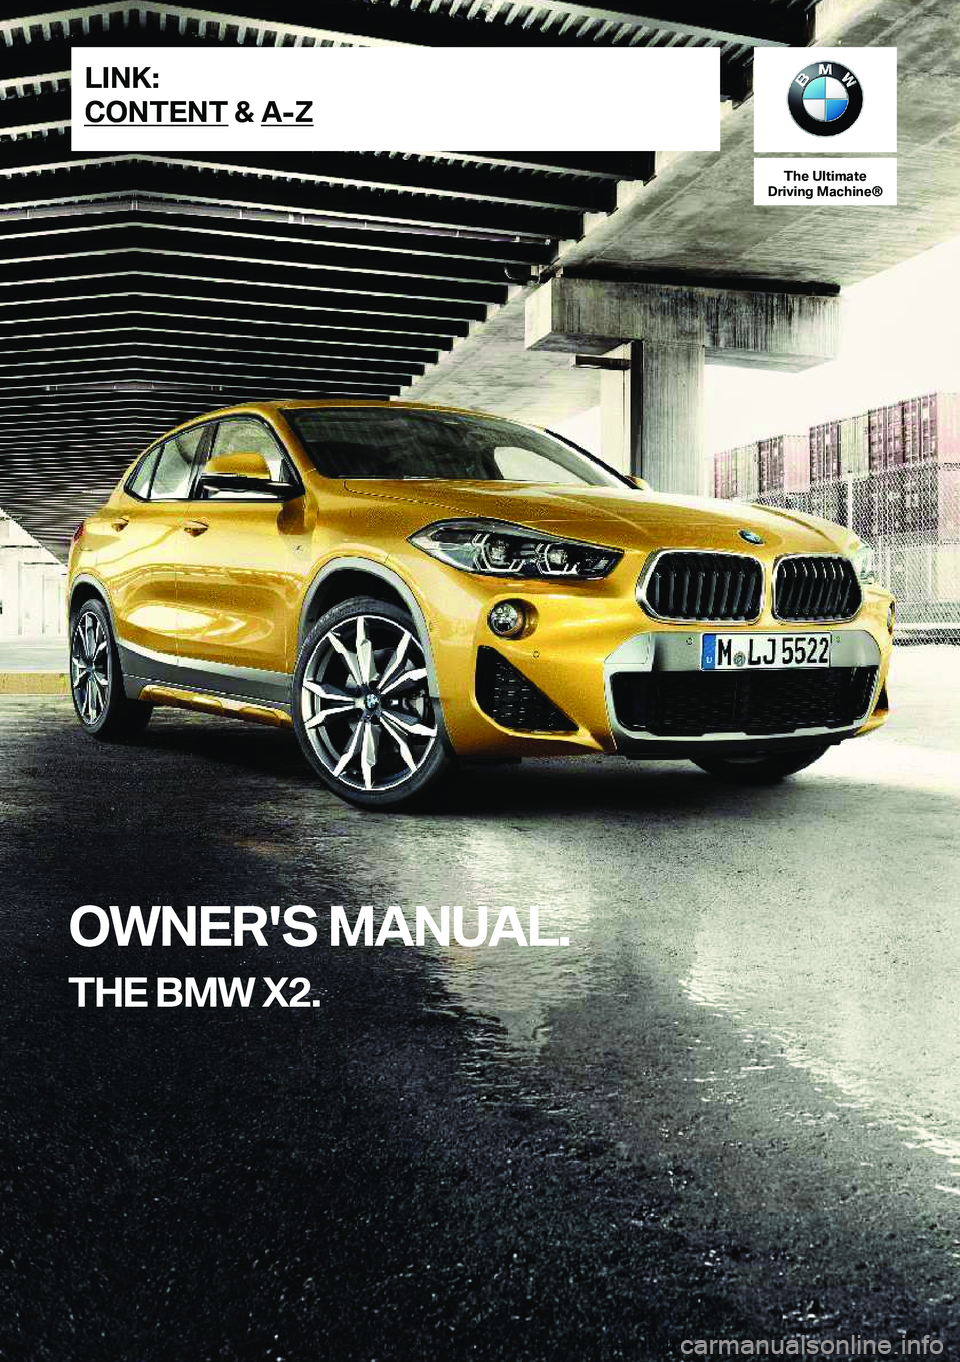 BMW X2 2018  Owners Manual �T�h�e��U�l�t�i�m�a�t�e
�D�r�i�v�i�n�g��M�a�c�h�i�n�e�n
�O�W�N�E�R�'�S��M�A�N�U�A�L�.
�T�H�E��B�M�W��X�2�.�L�I�N�K�:
�C�O�N�T�E�N�T��&��A�-�Z�O�n�l�i�n�e� �E�d�i�t�i�o�n� �f�o�r� �P�a�r�t� 